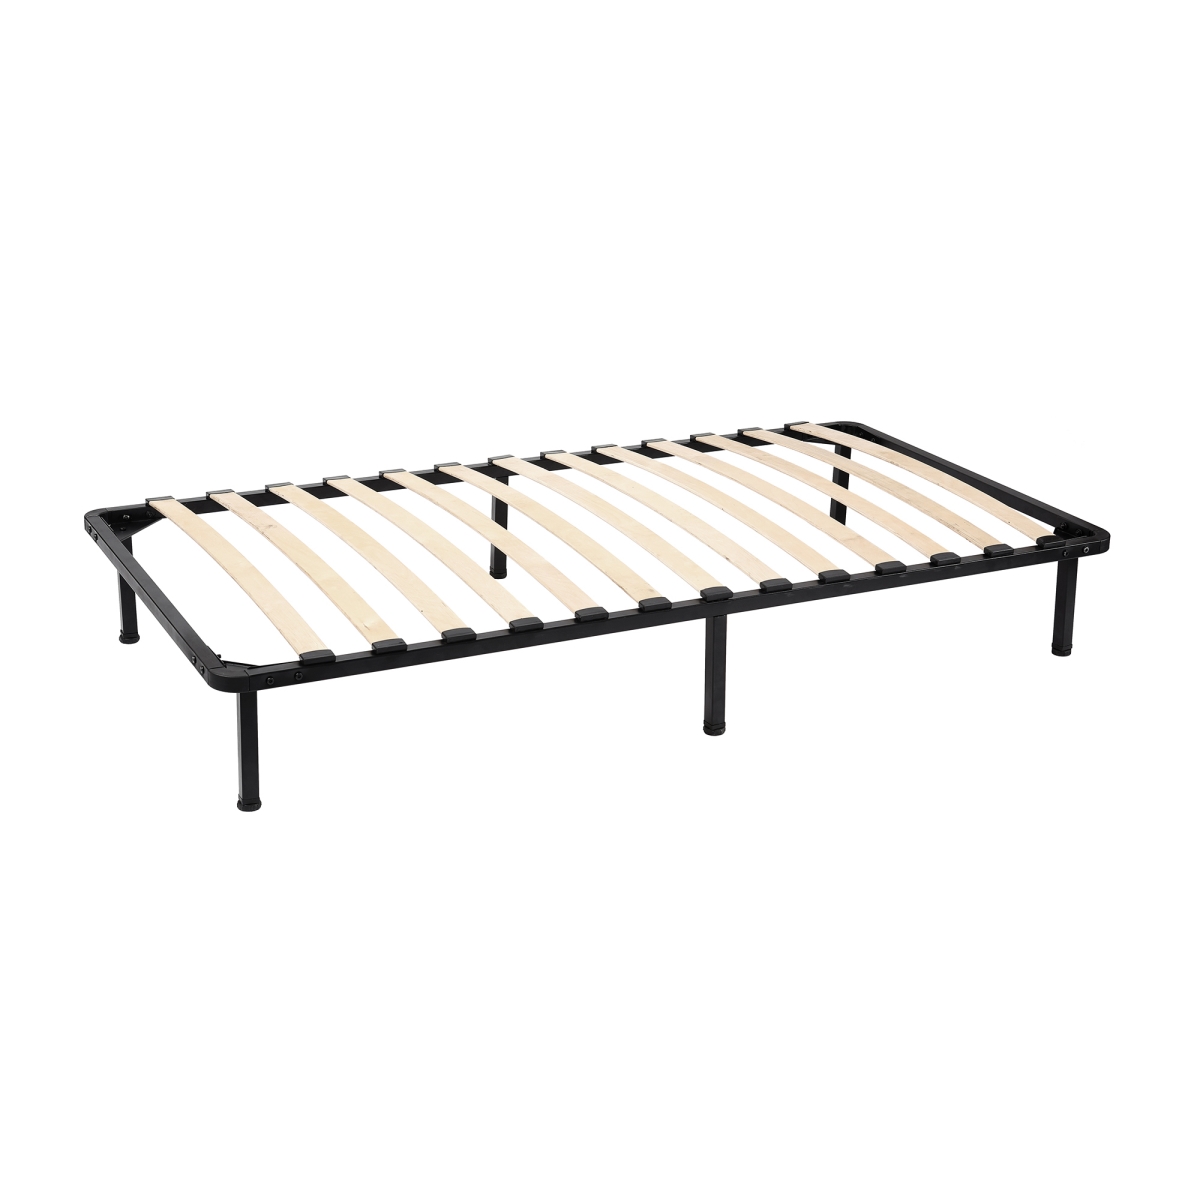 Fb3002t Angeland Cannet Metal Platform Bed Frame With Wooden Slats - Twin Size